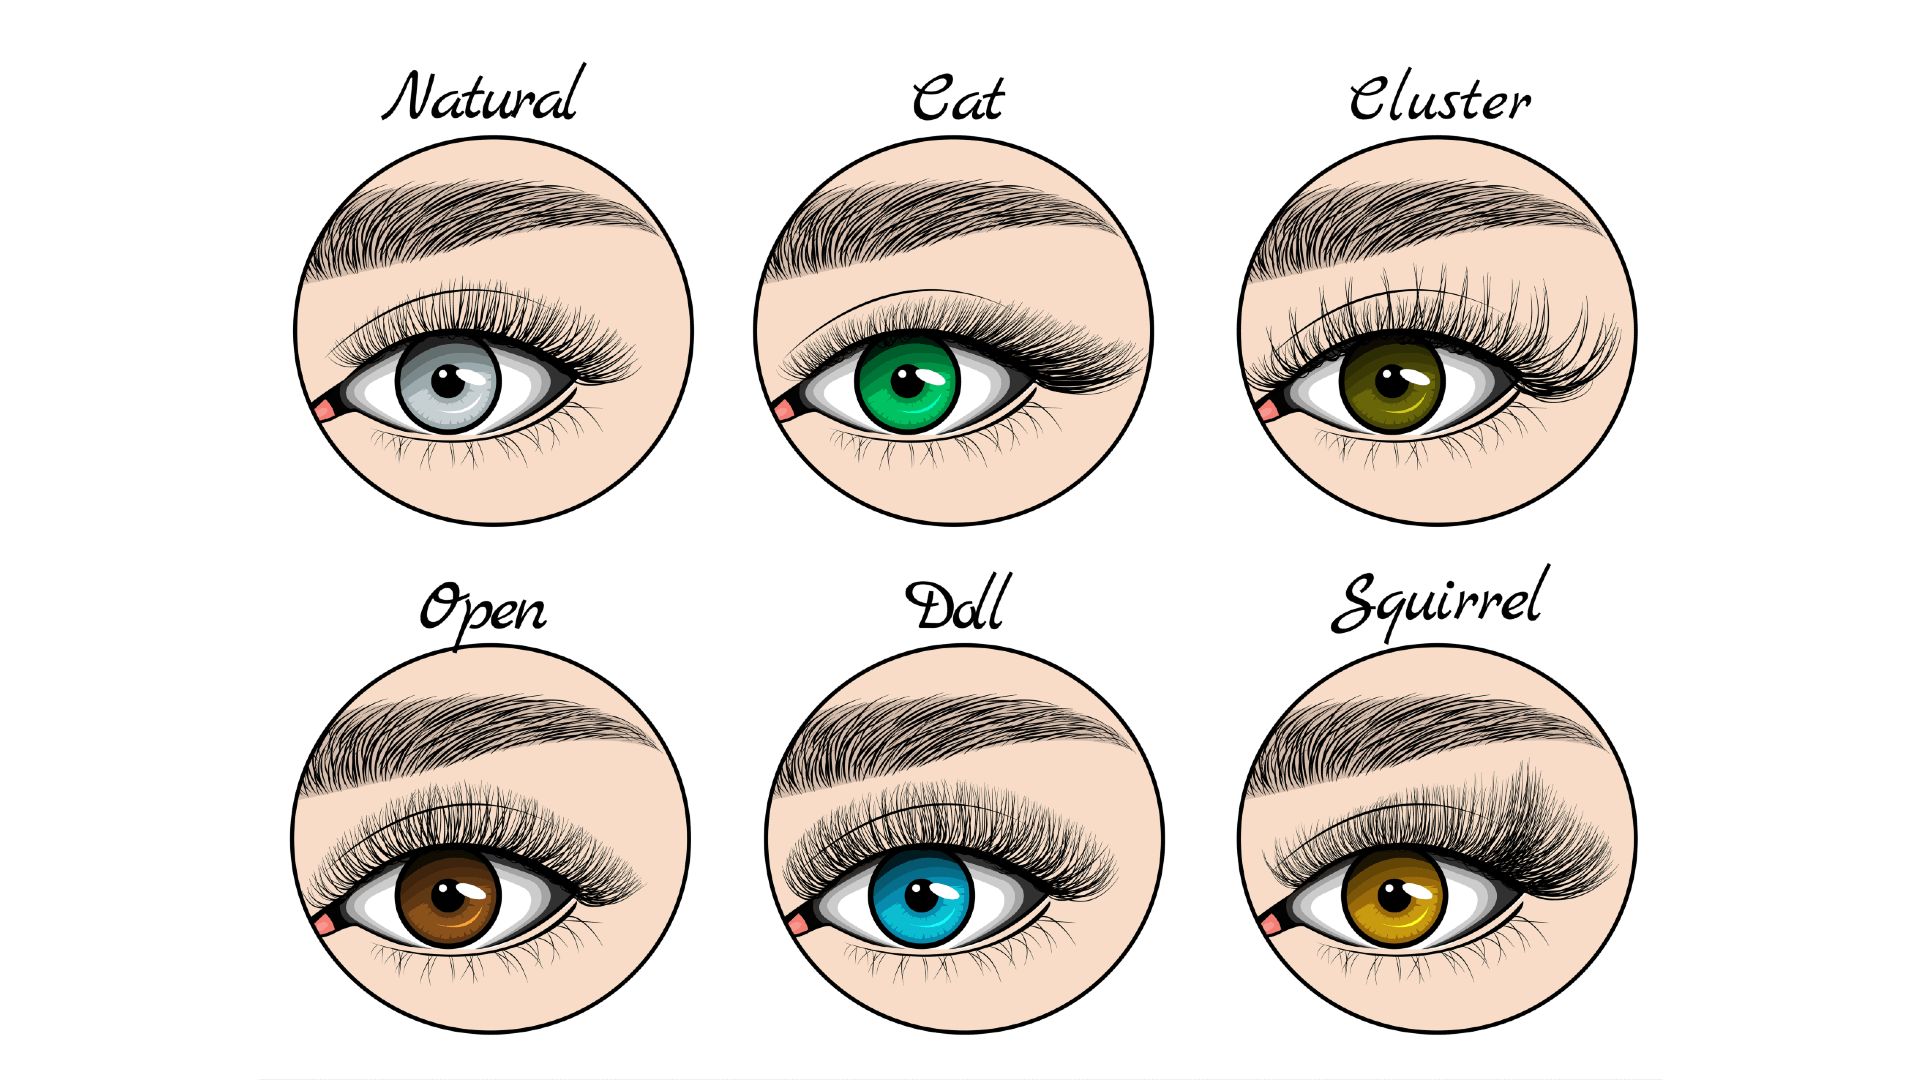 10. "How to Choose the Right Nail Art and Eyelash Extension Styles for Your Eye Shape" - wide 1